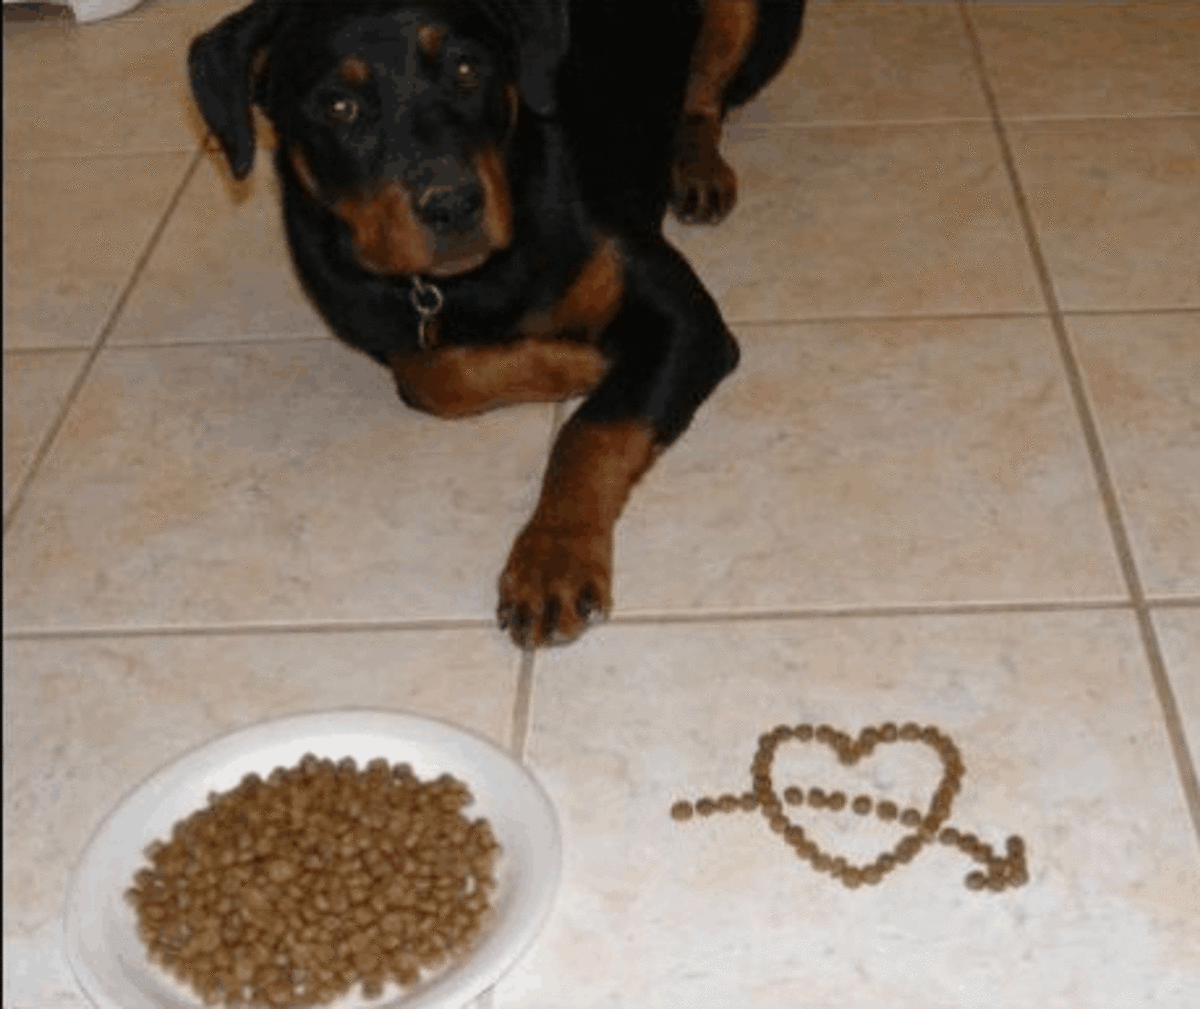 Dry food has pros and cons